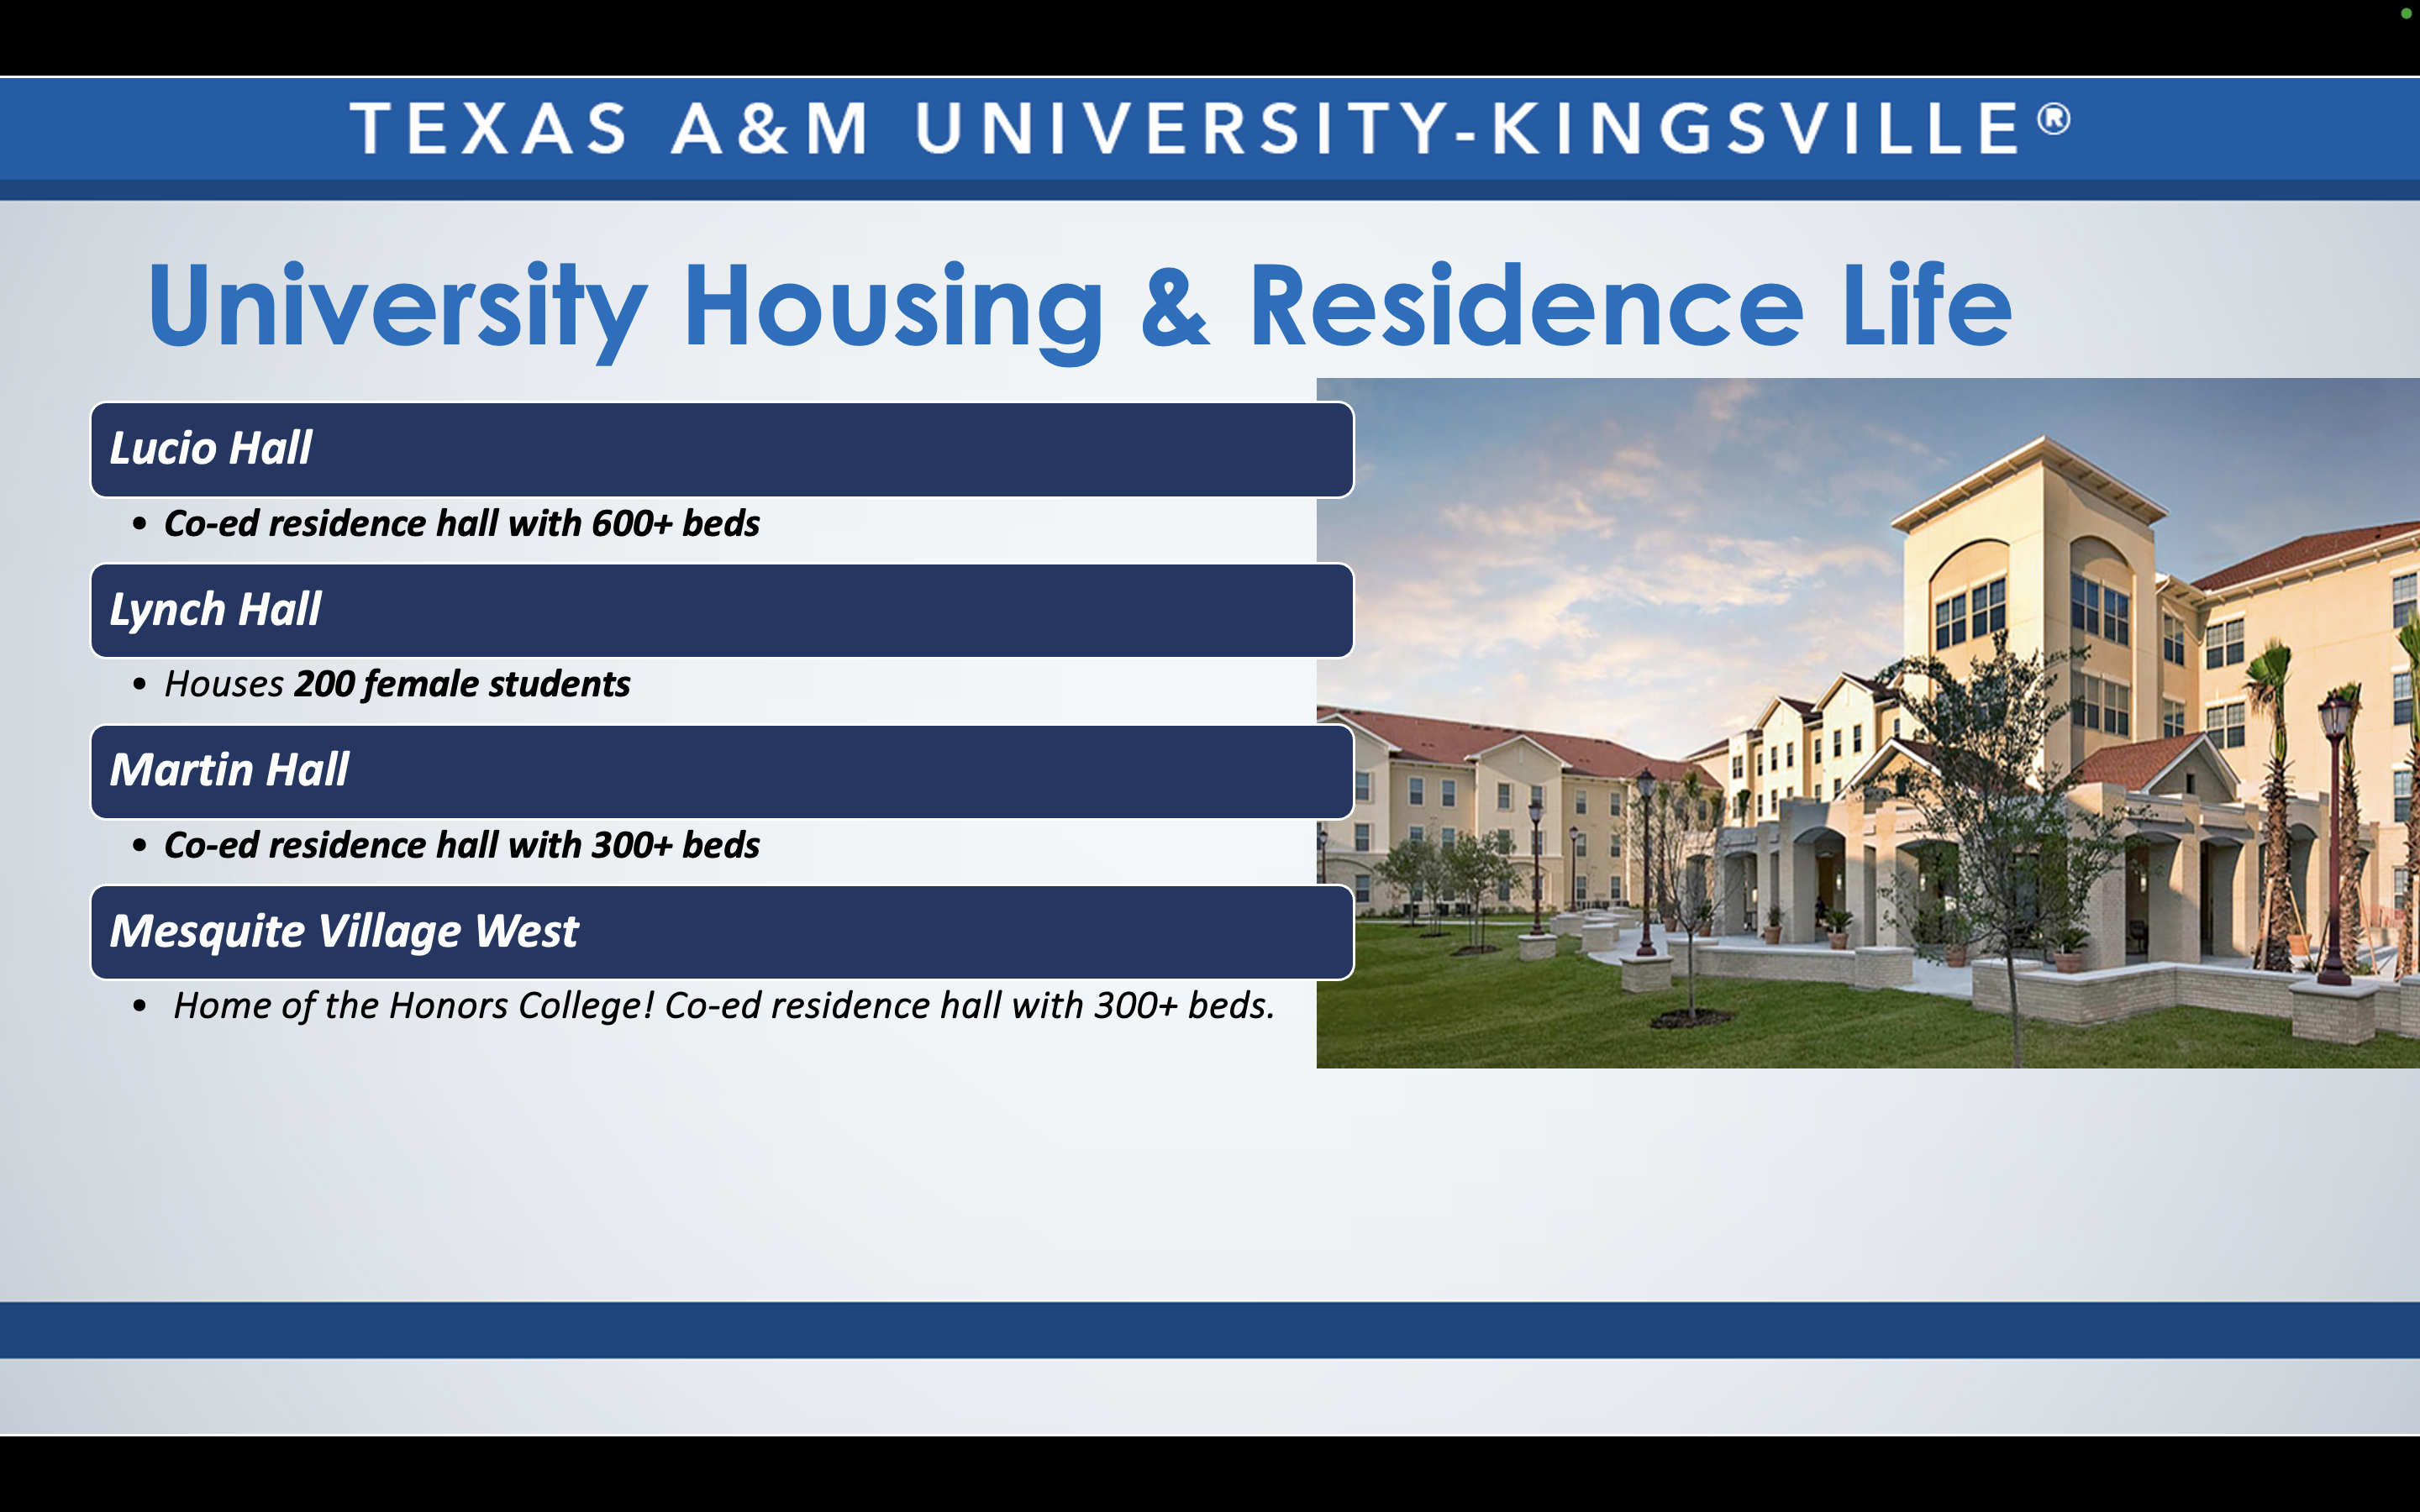 A graphic reads: Texas A&M University-Kingsville. University Housing & Residence Life. Lucio Hall. Co-ed residence hall with 600+ beds. Lynch Hall. Houses 200 female students. Martin Hall. Co-ed residence hall with 300+ beds. Mesquite Village West. Home of the Honors College. Co-ed residence hall with 300+ beds.